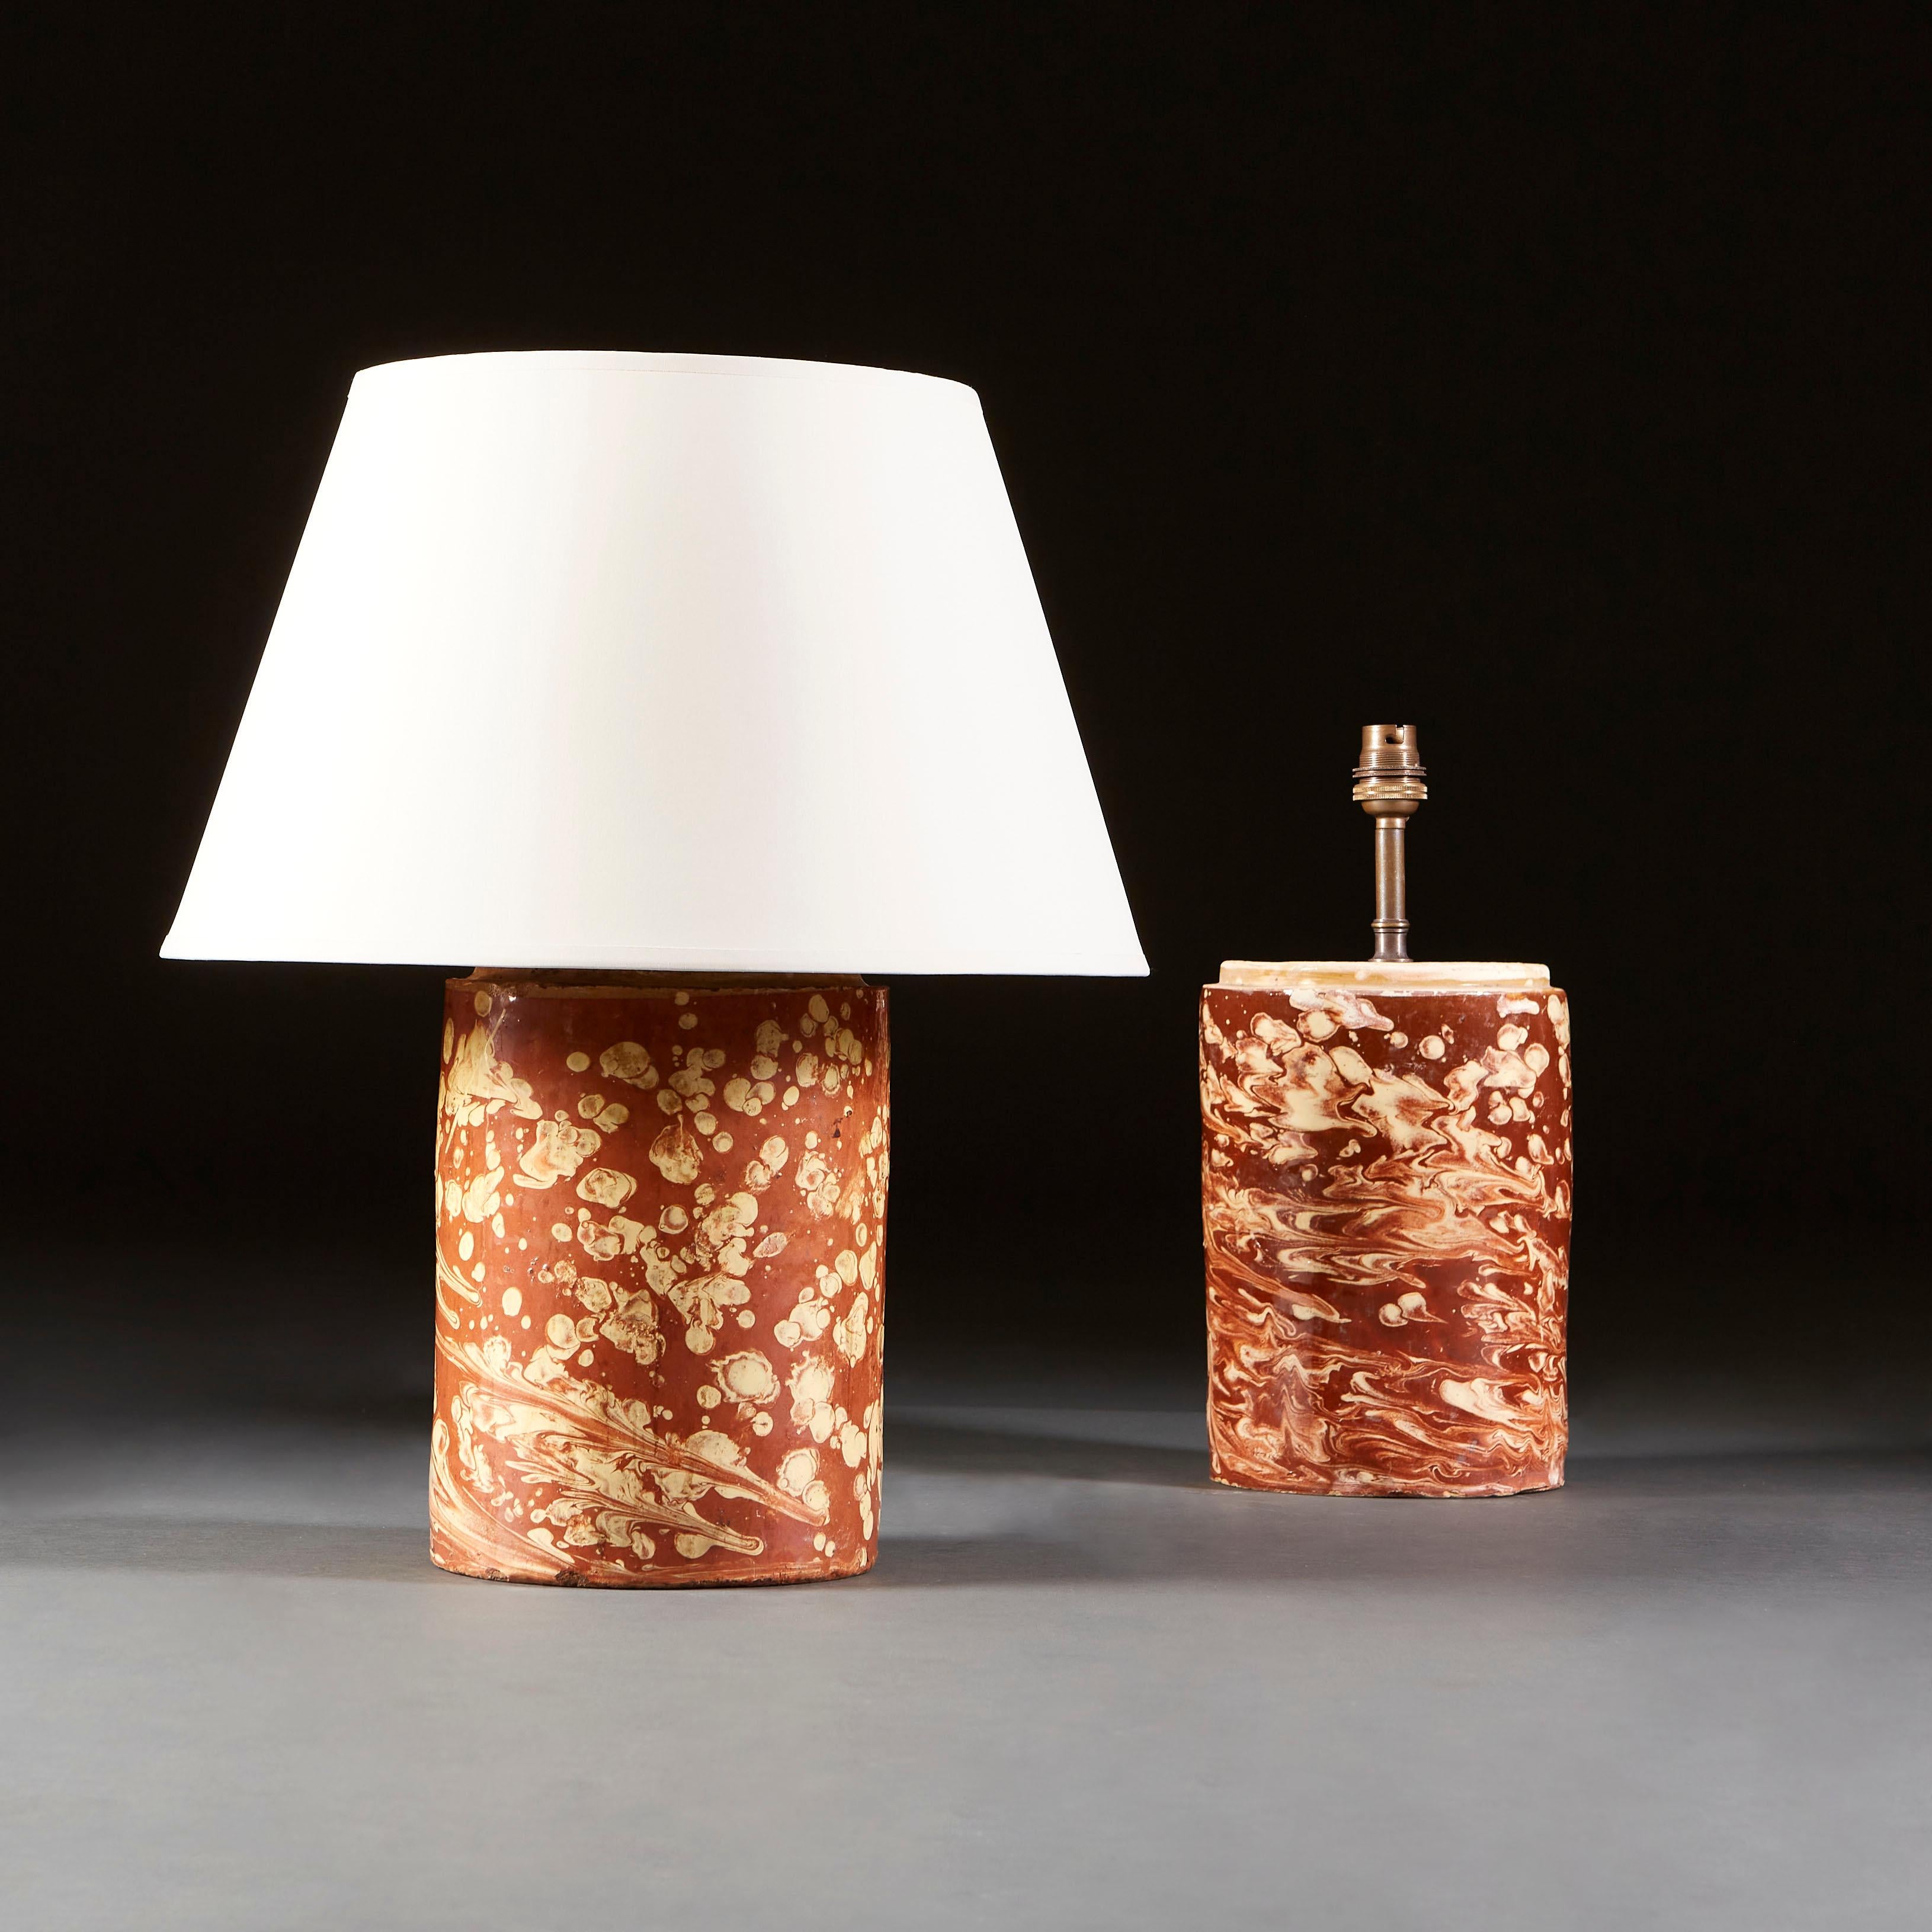 A pair of early nineteenth century Italian pharmacy jars of cylindrical form with a sienna and cream marbleised glaze across the surface of the vases, now as lamps.

Currently wired for the UK.

Please note: lampshades not included.